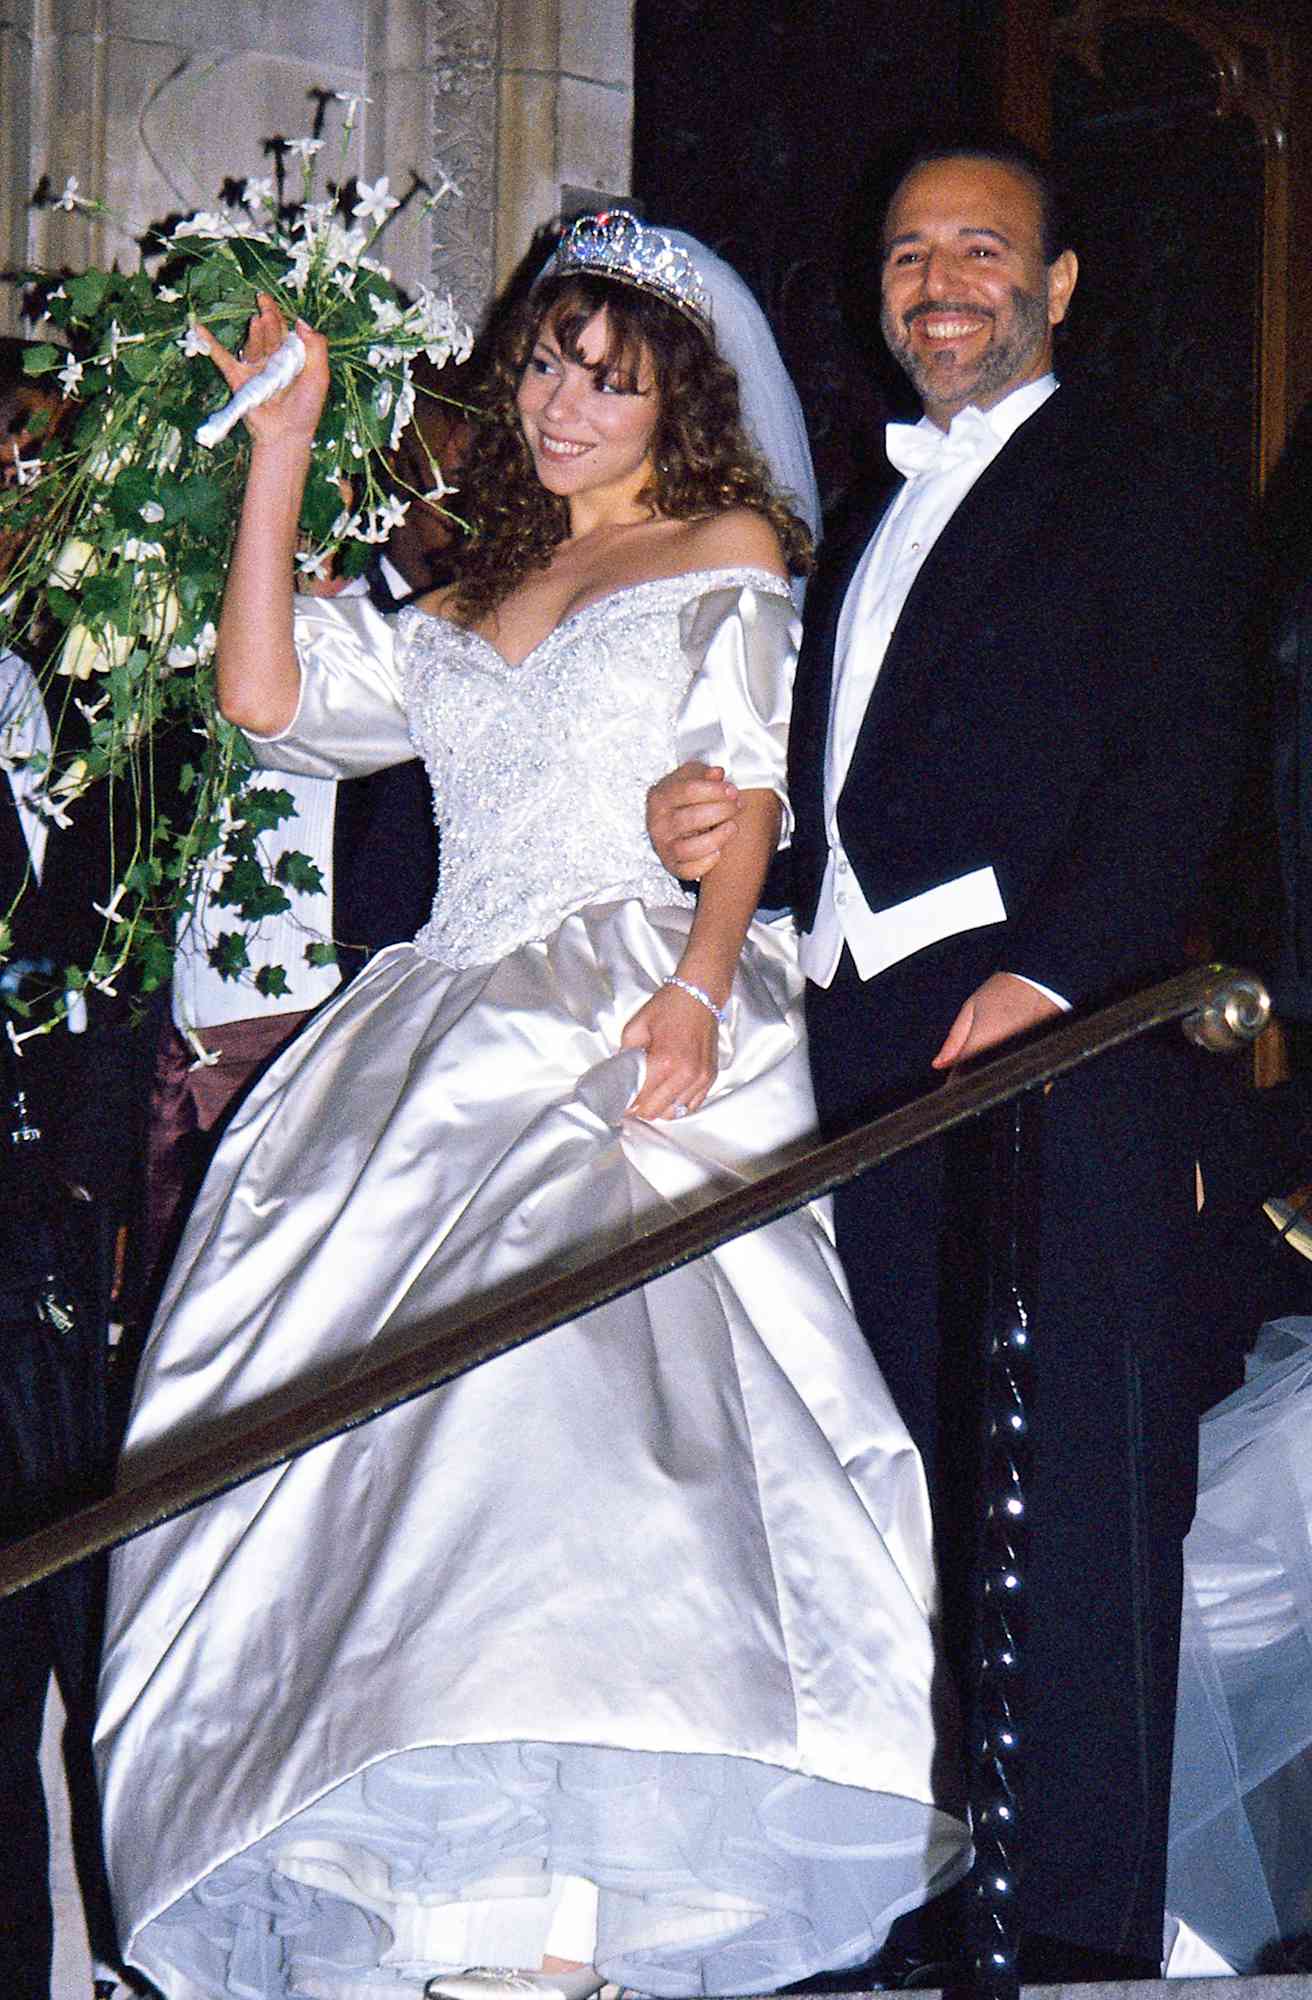 The Wedding of Mariah Carey and Tommy Mottola